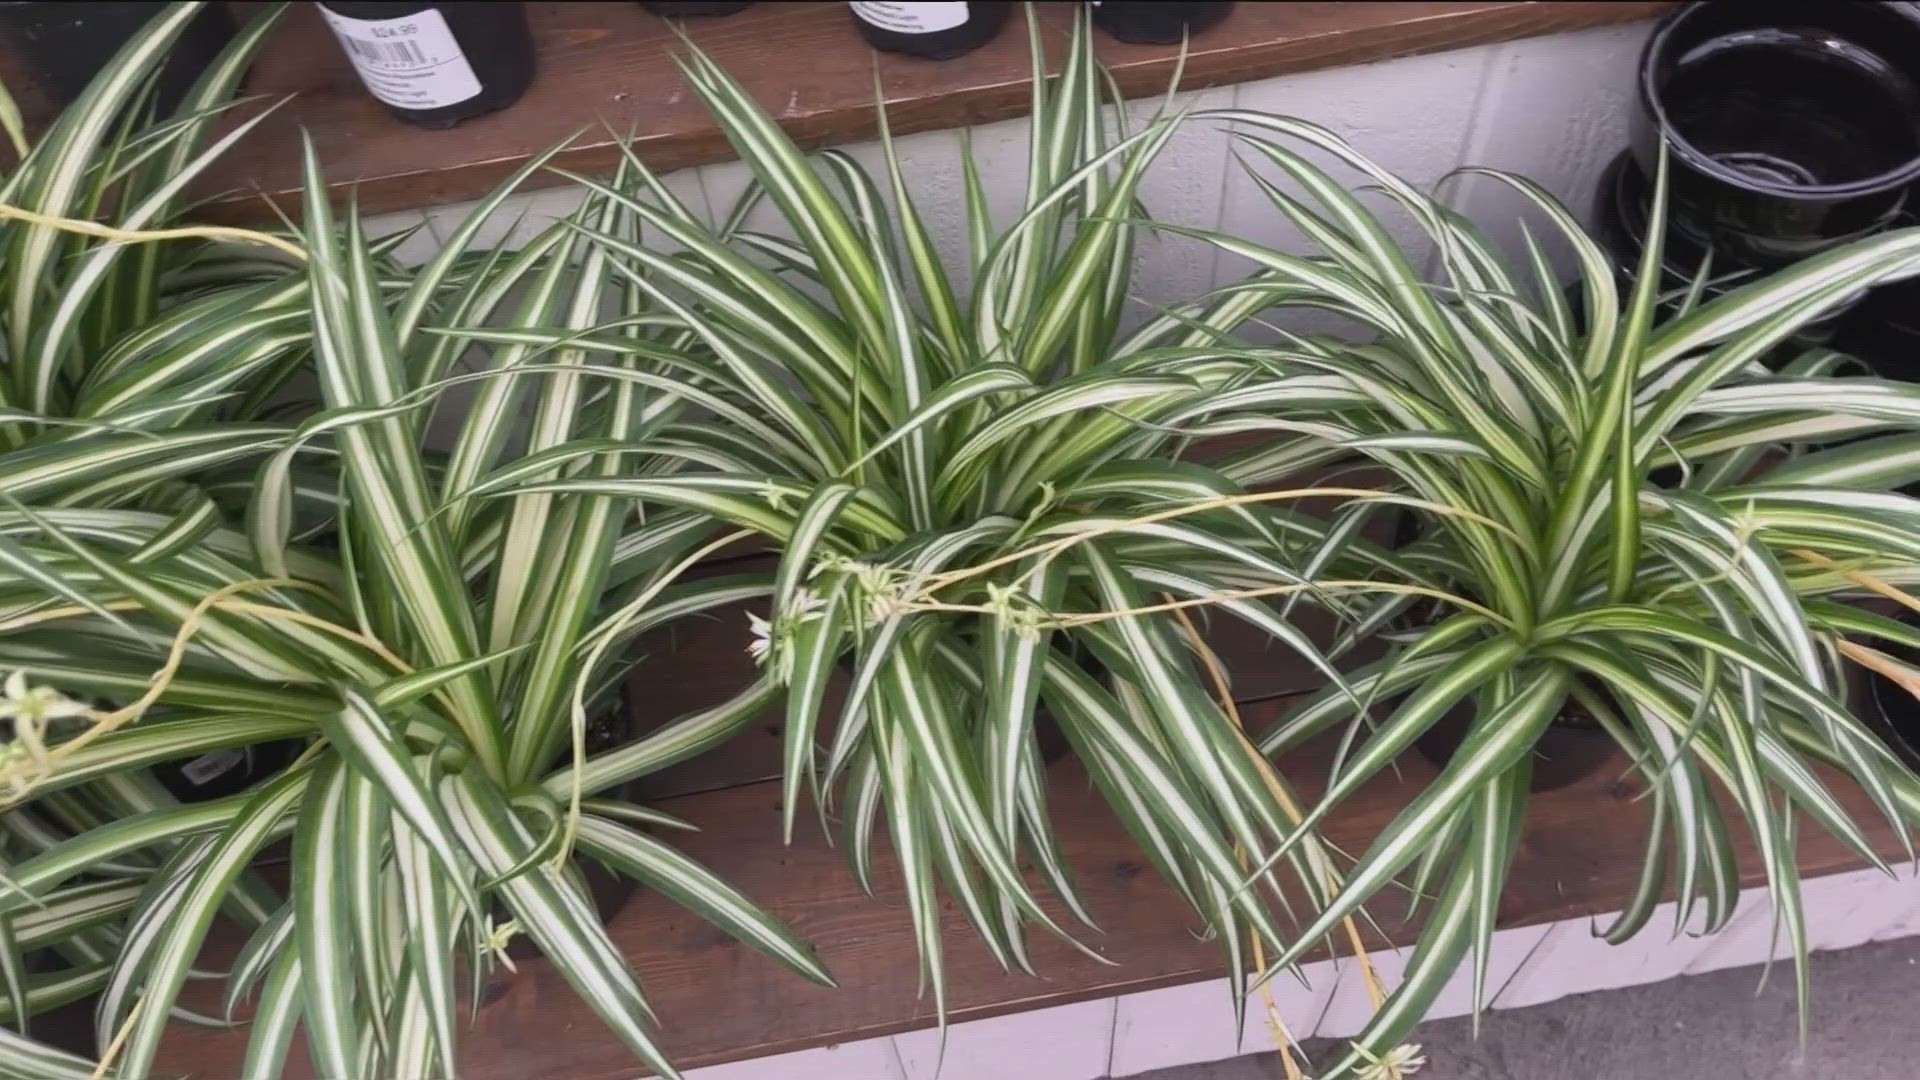 Some ideas for indoor plants that don't require a lot of sunlight.